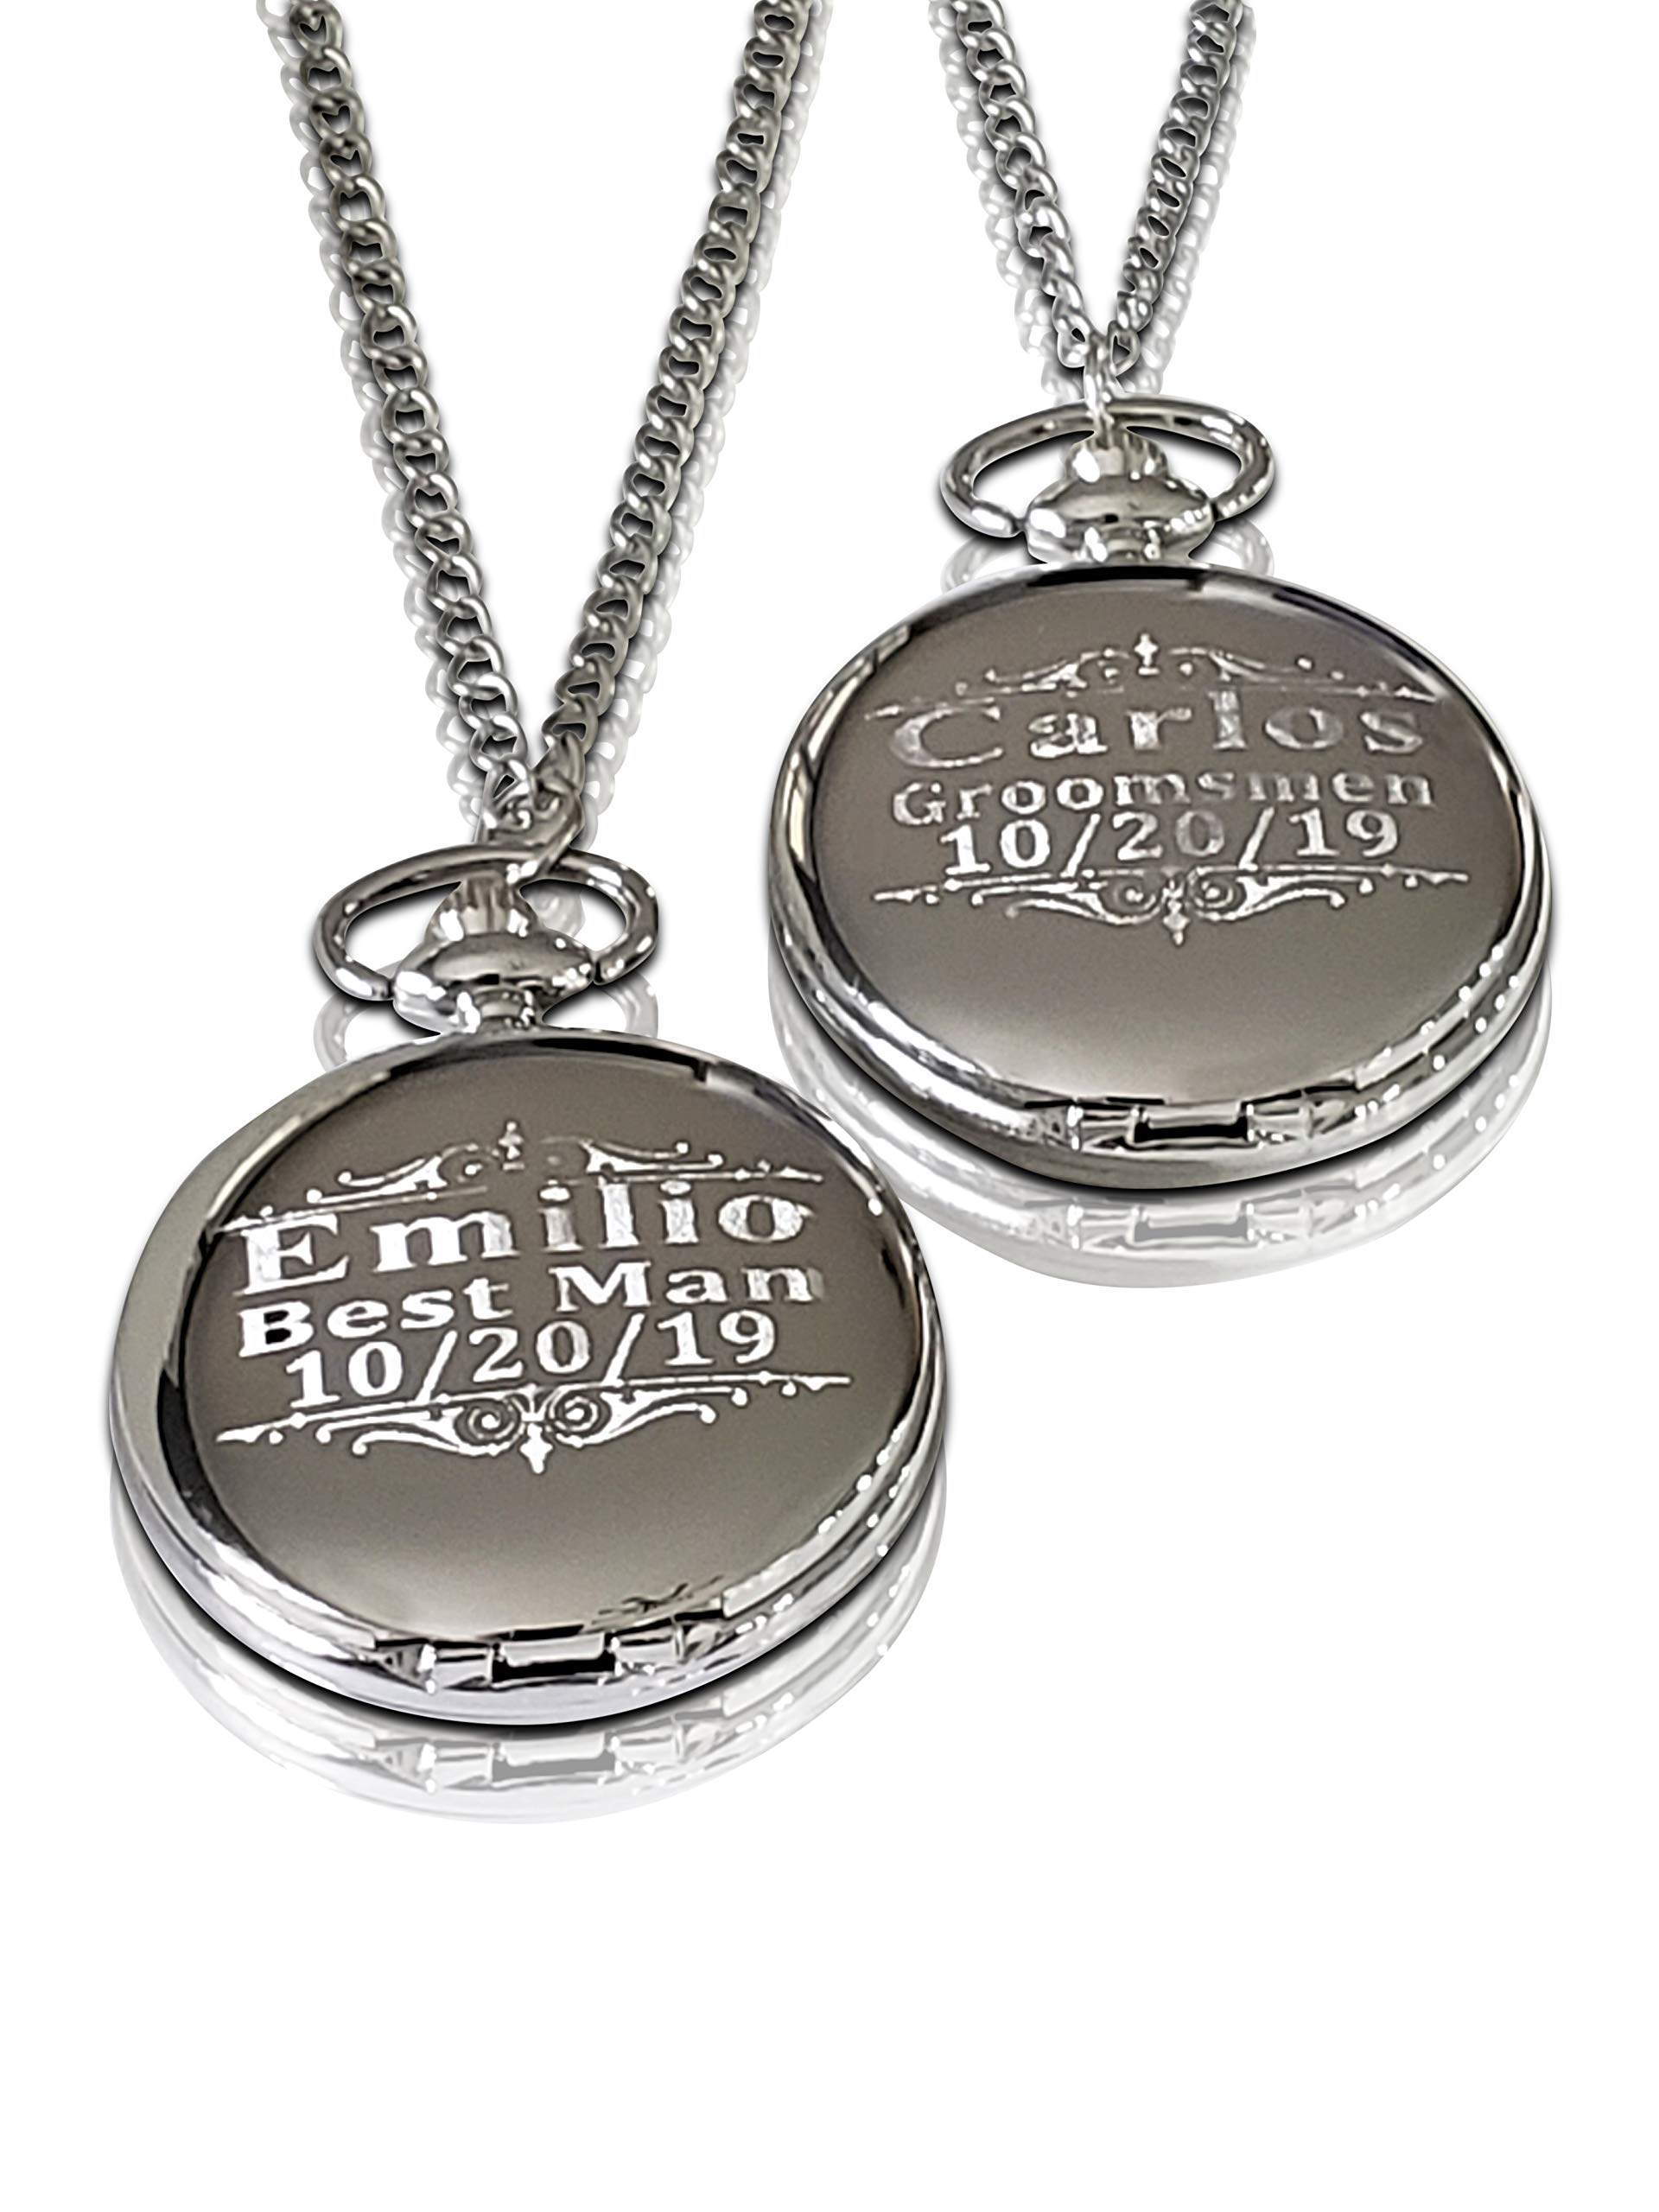 Personalized Pocket Watch - Engraved Wedding Gifts - Chain, Box and Engraving Included, Comes in 4 Colors - Custom Engraved